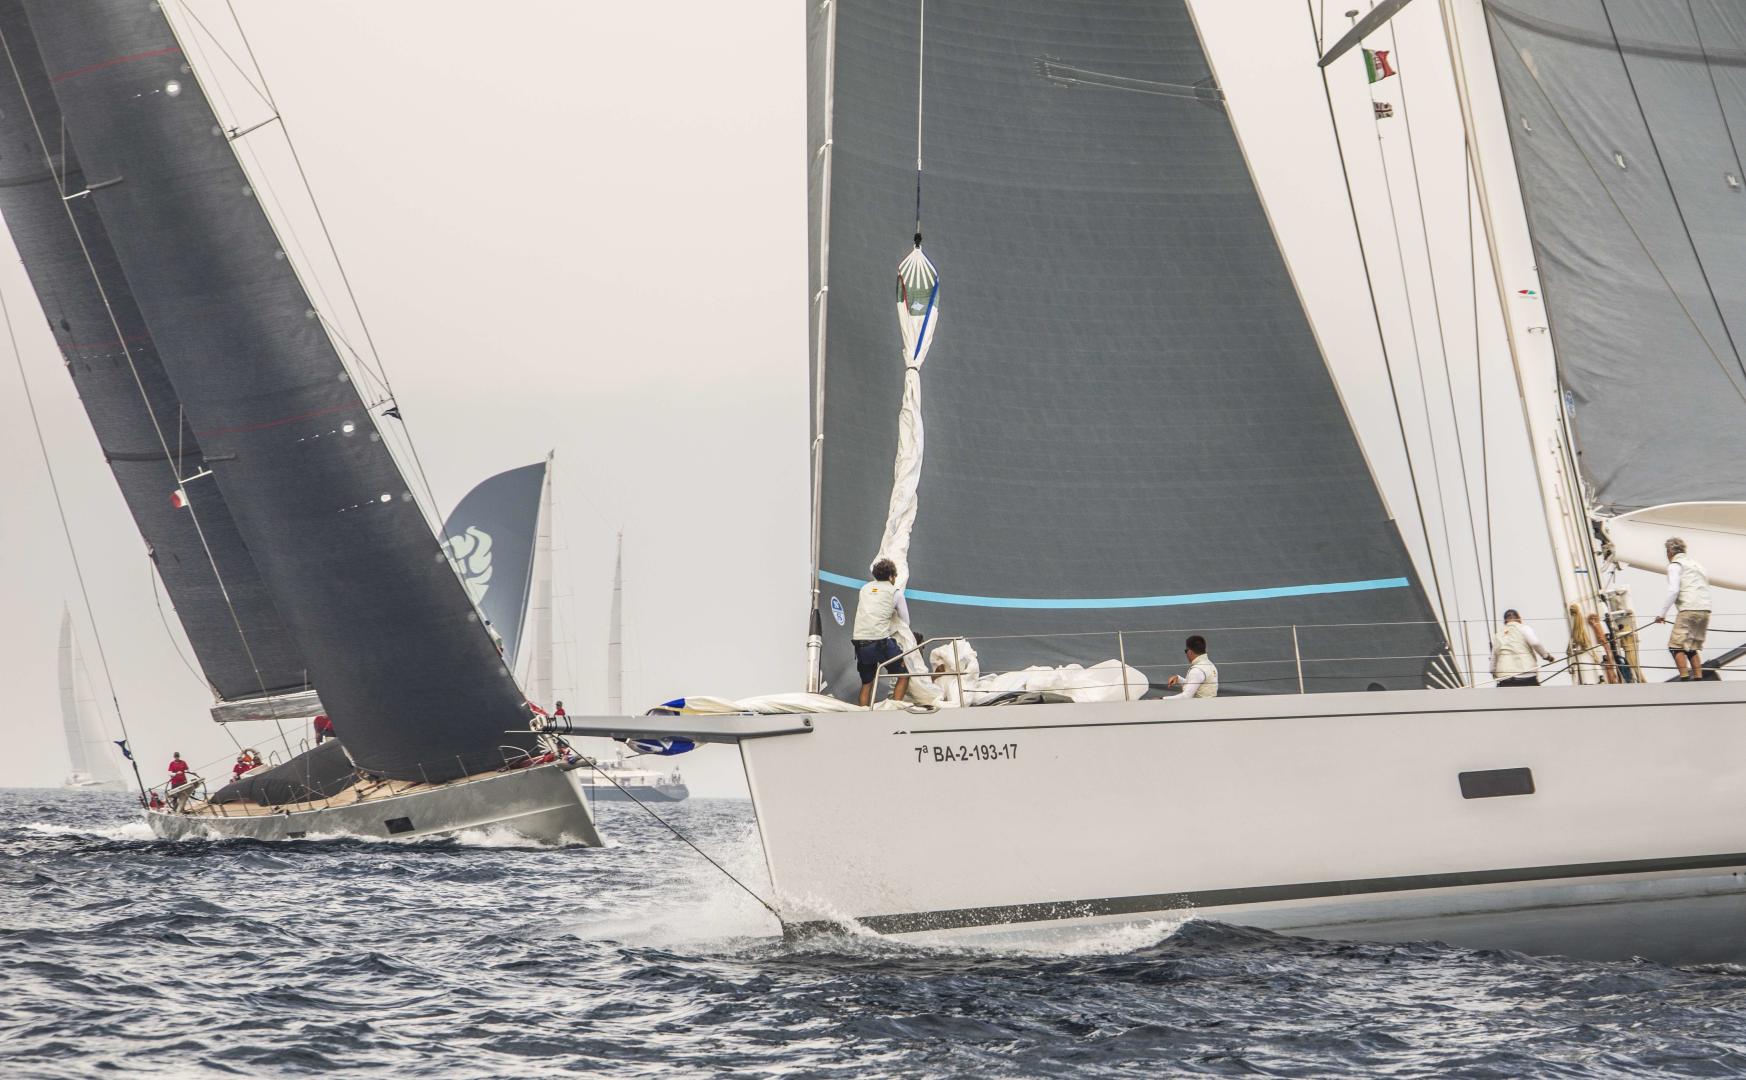 The SWS Trophy day 4: match races show that sailing is a spectator sport